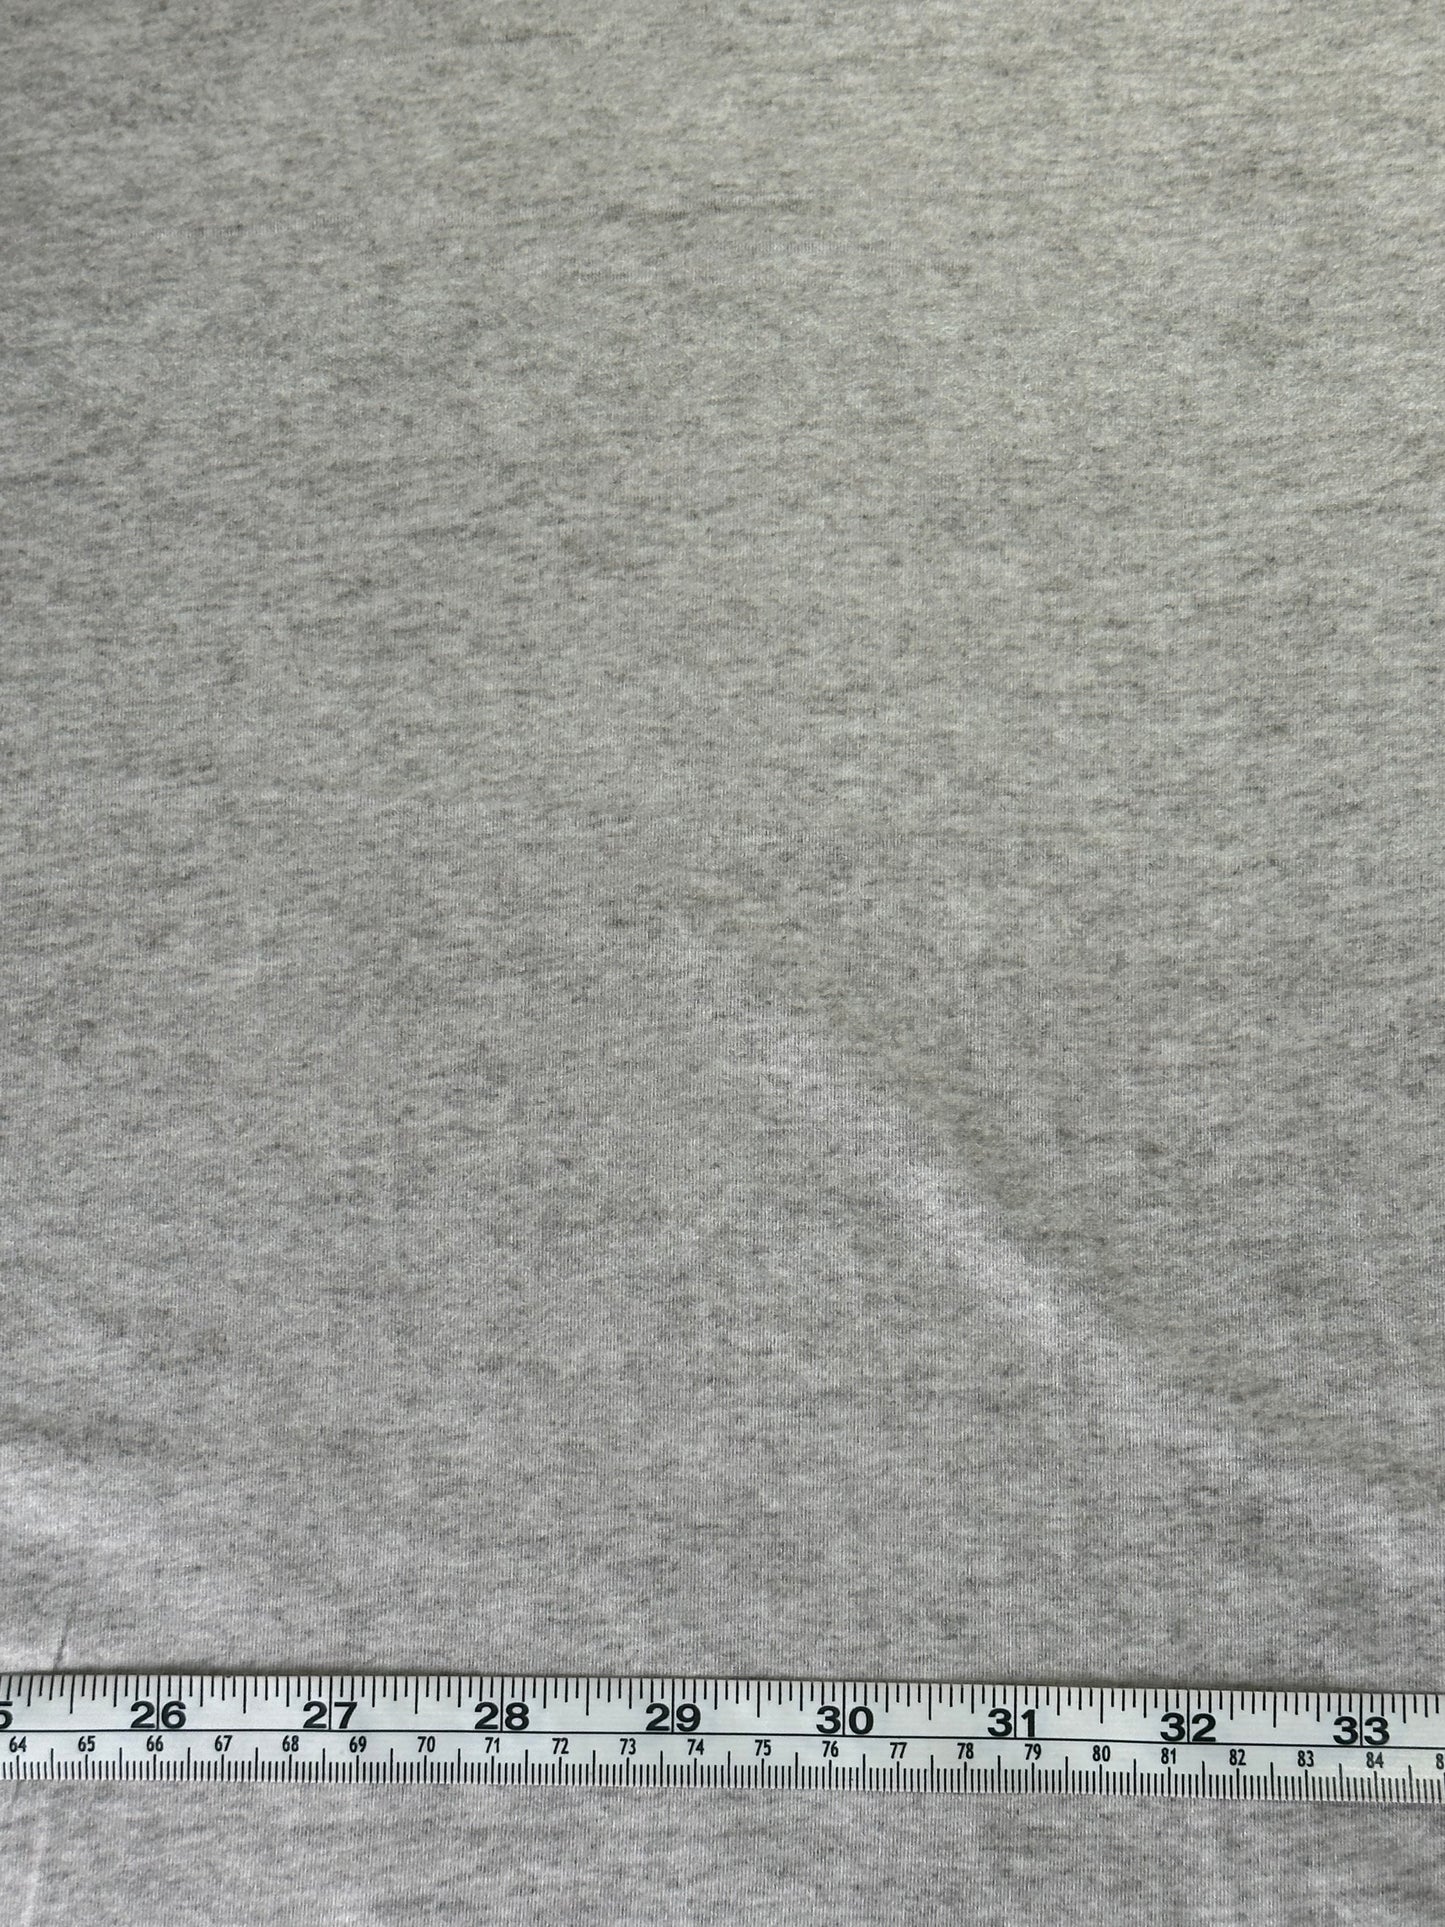 Heathered Solid in Oatmeal on Double Brushed Poly Knit Fabric Sold by the 1/4 yard